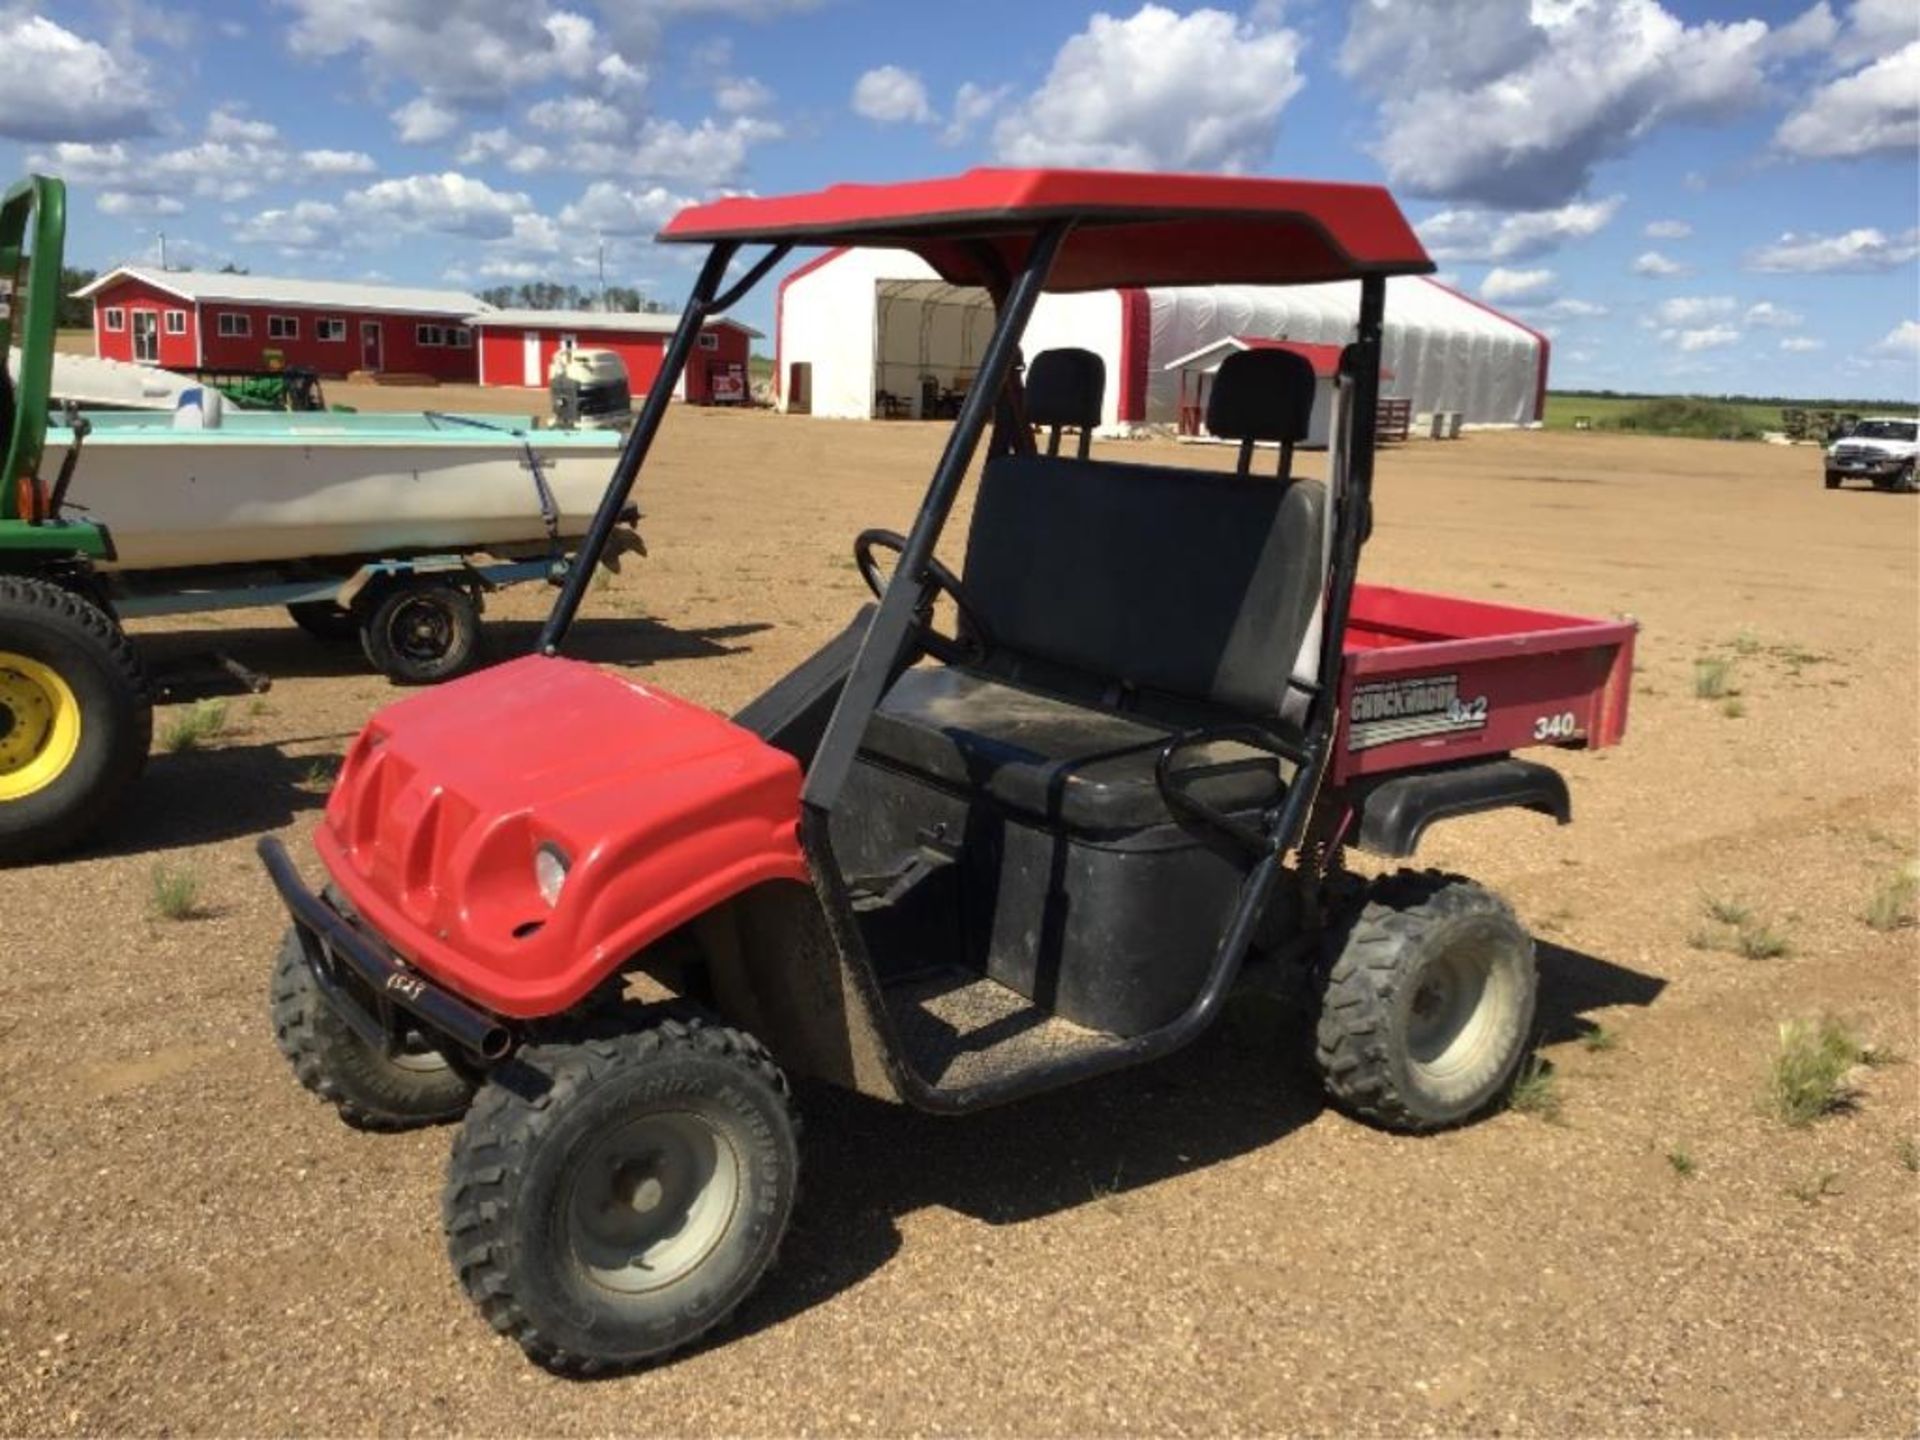 2008 Chuckwagon 4x2 Side-by-Side ATV VIN A4PUTXH1K8A15977A Electric & Pull Start, 2in Rear - Image 3 of 9